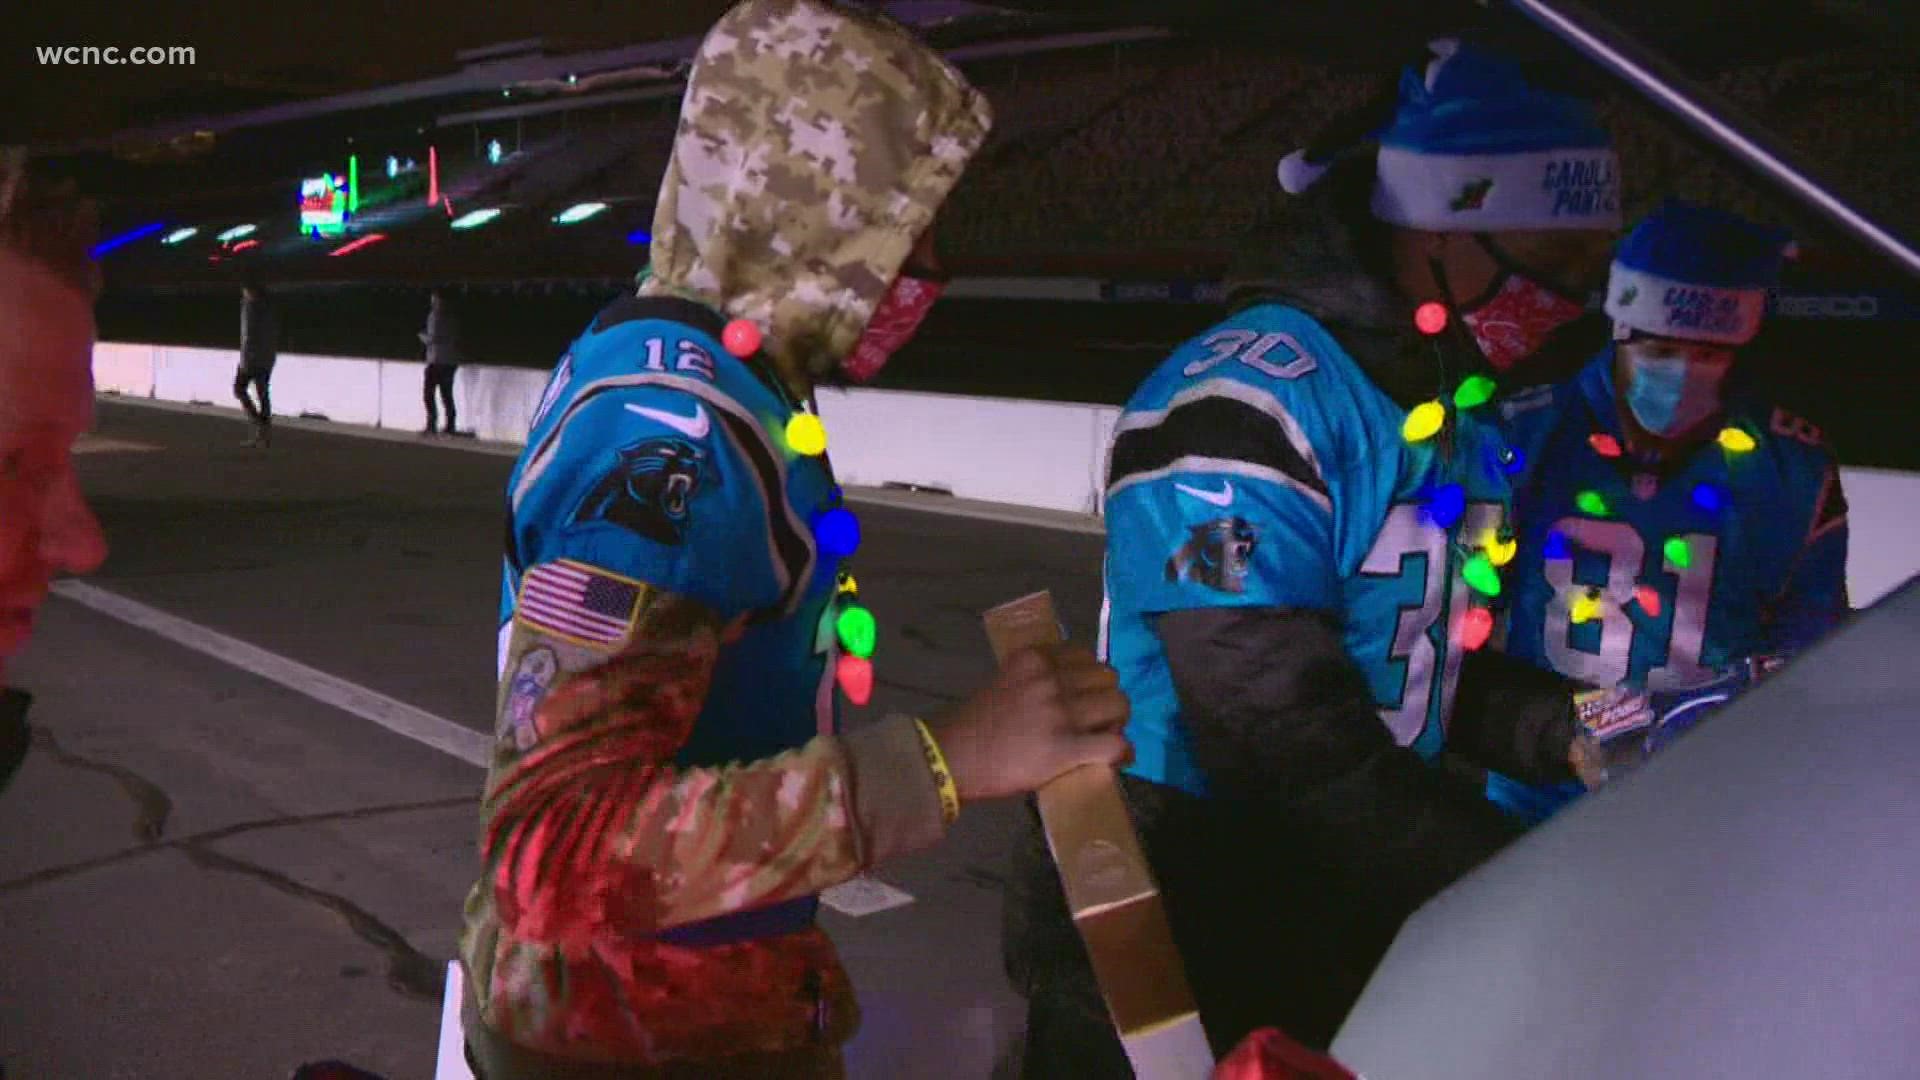 Carolina Panthers players were there to load up cars for families in need.